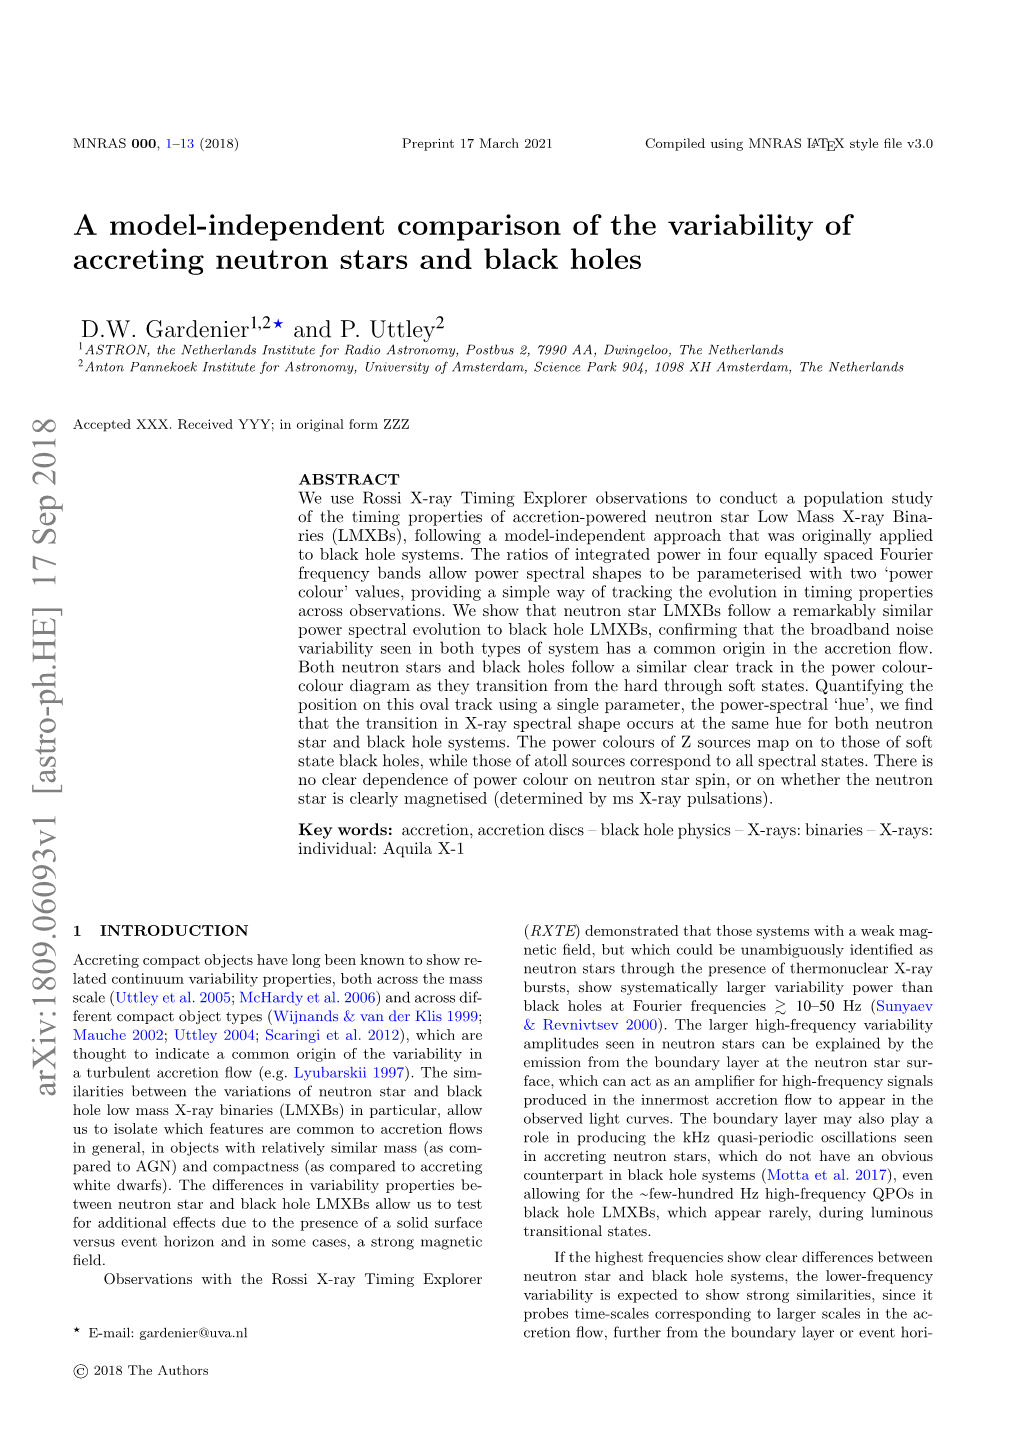 A Model-Independent Comparison of the Variability of Accreting Neutron Stars and Black Holes